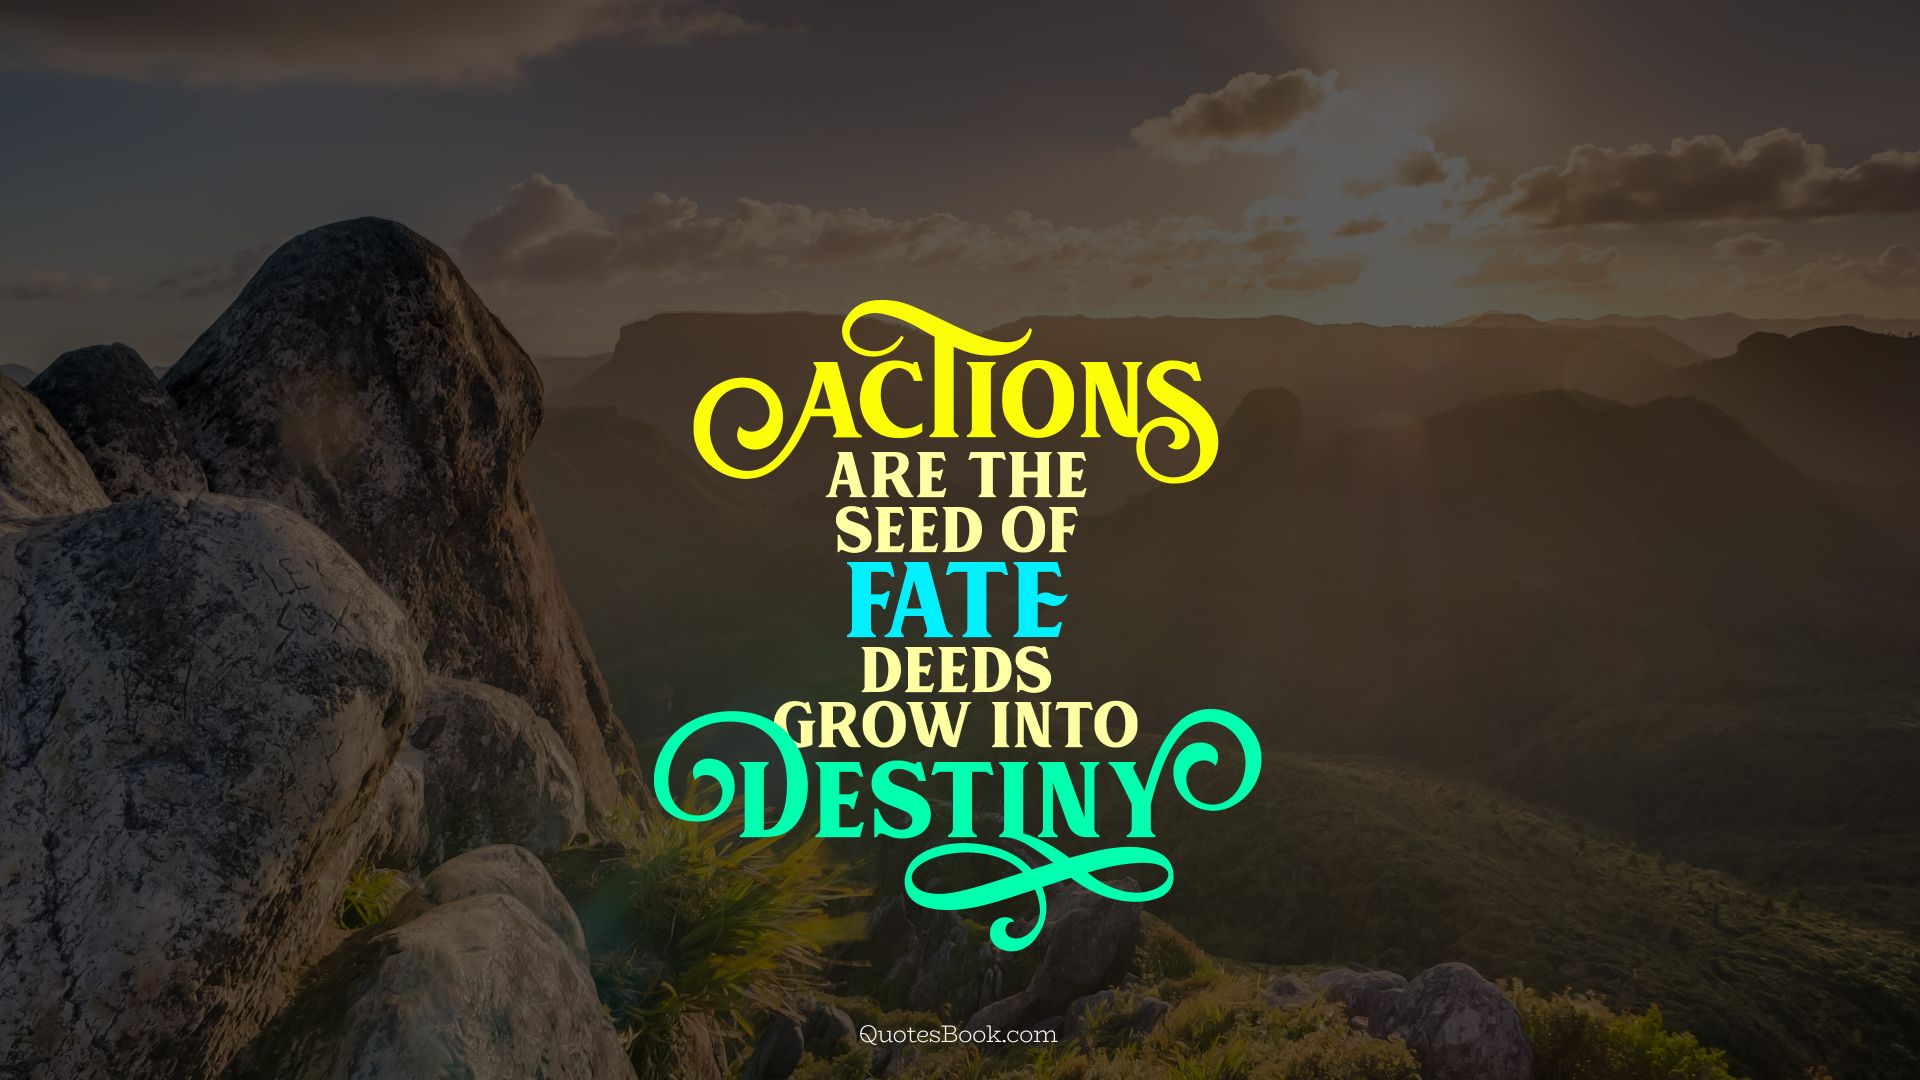 Actions are the seed of fate deeds grow into destiny